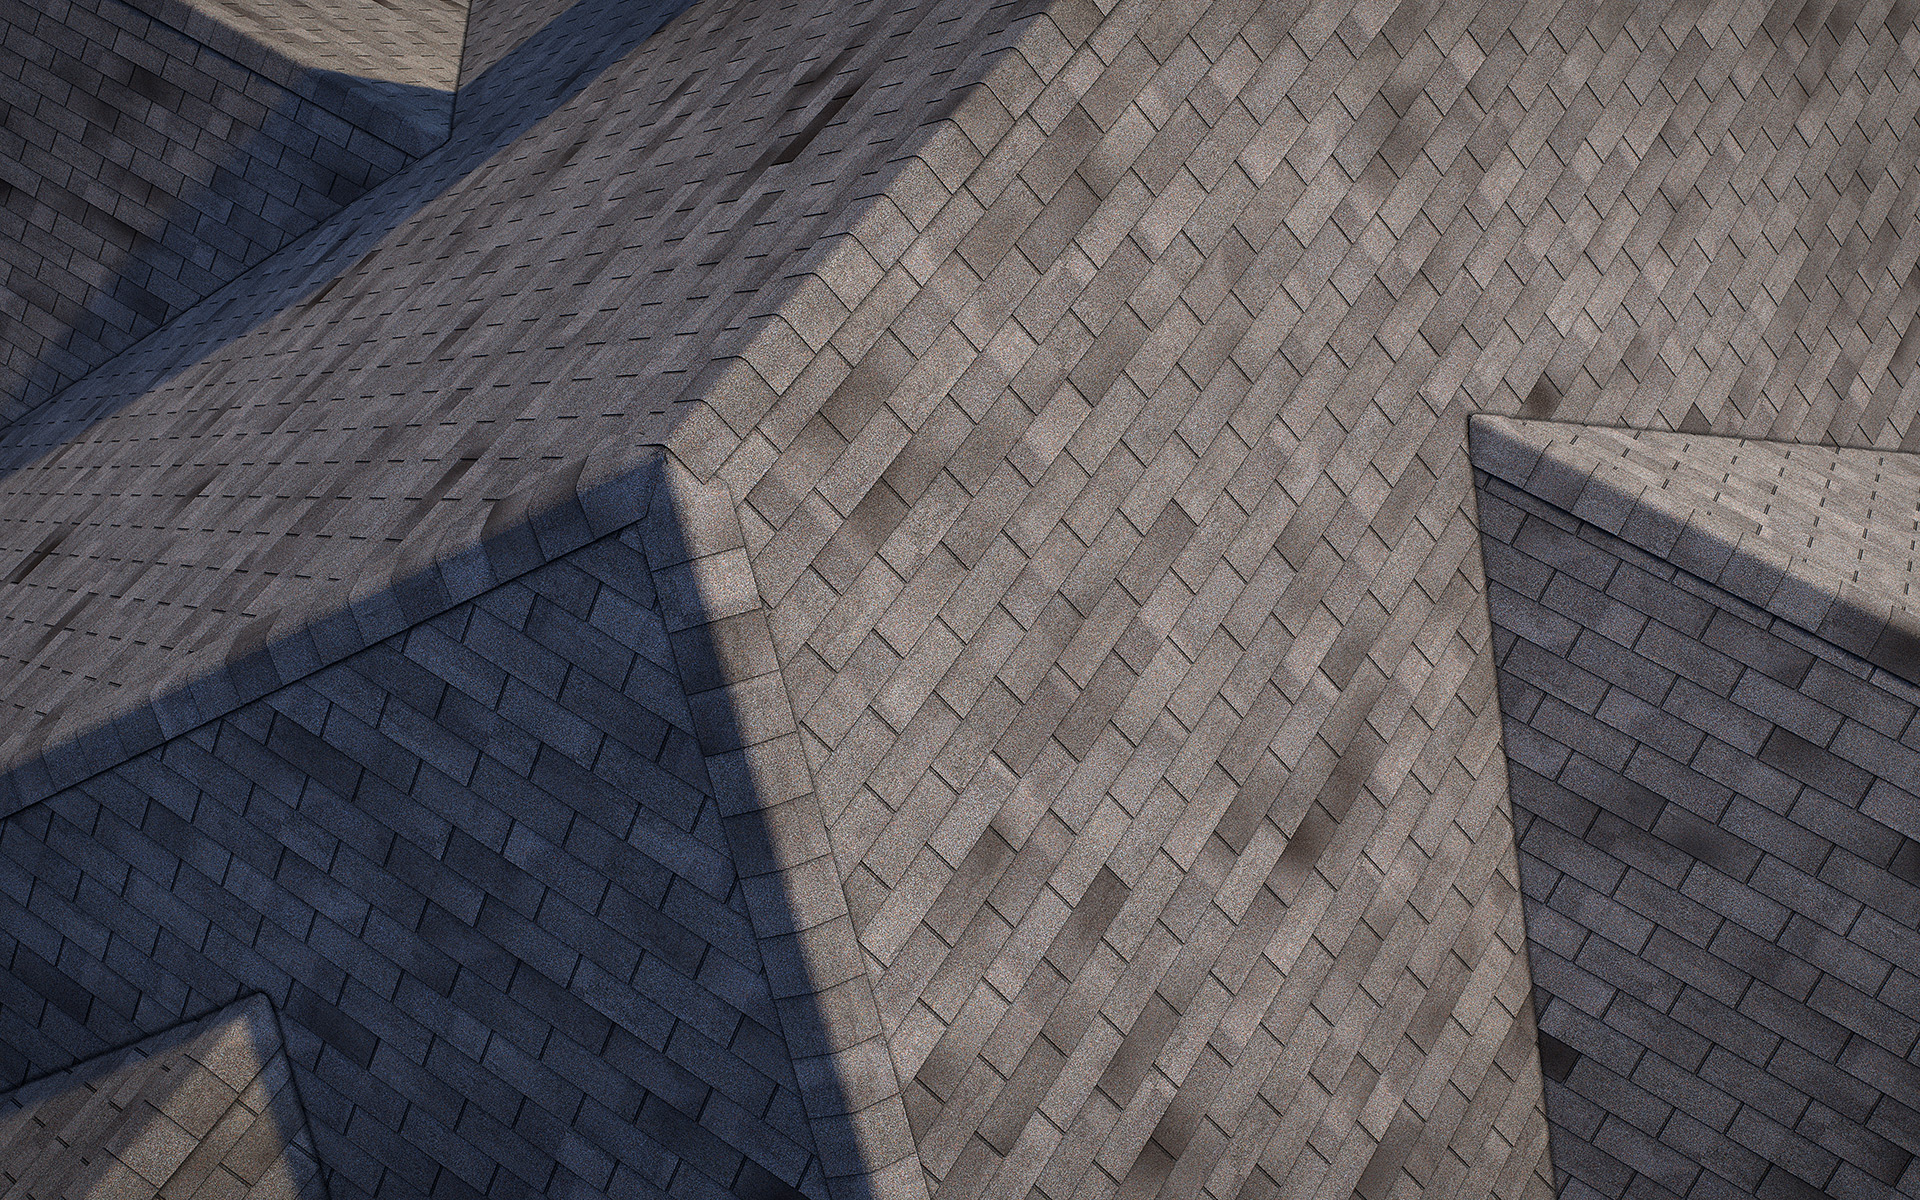 3-tab asphalt roof shingles wood color 3D model preset for 3dsmax and RailClone. Rendered with vray, made for arch-viz.